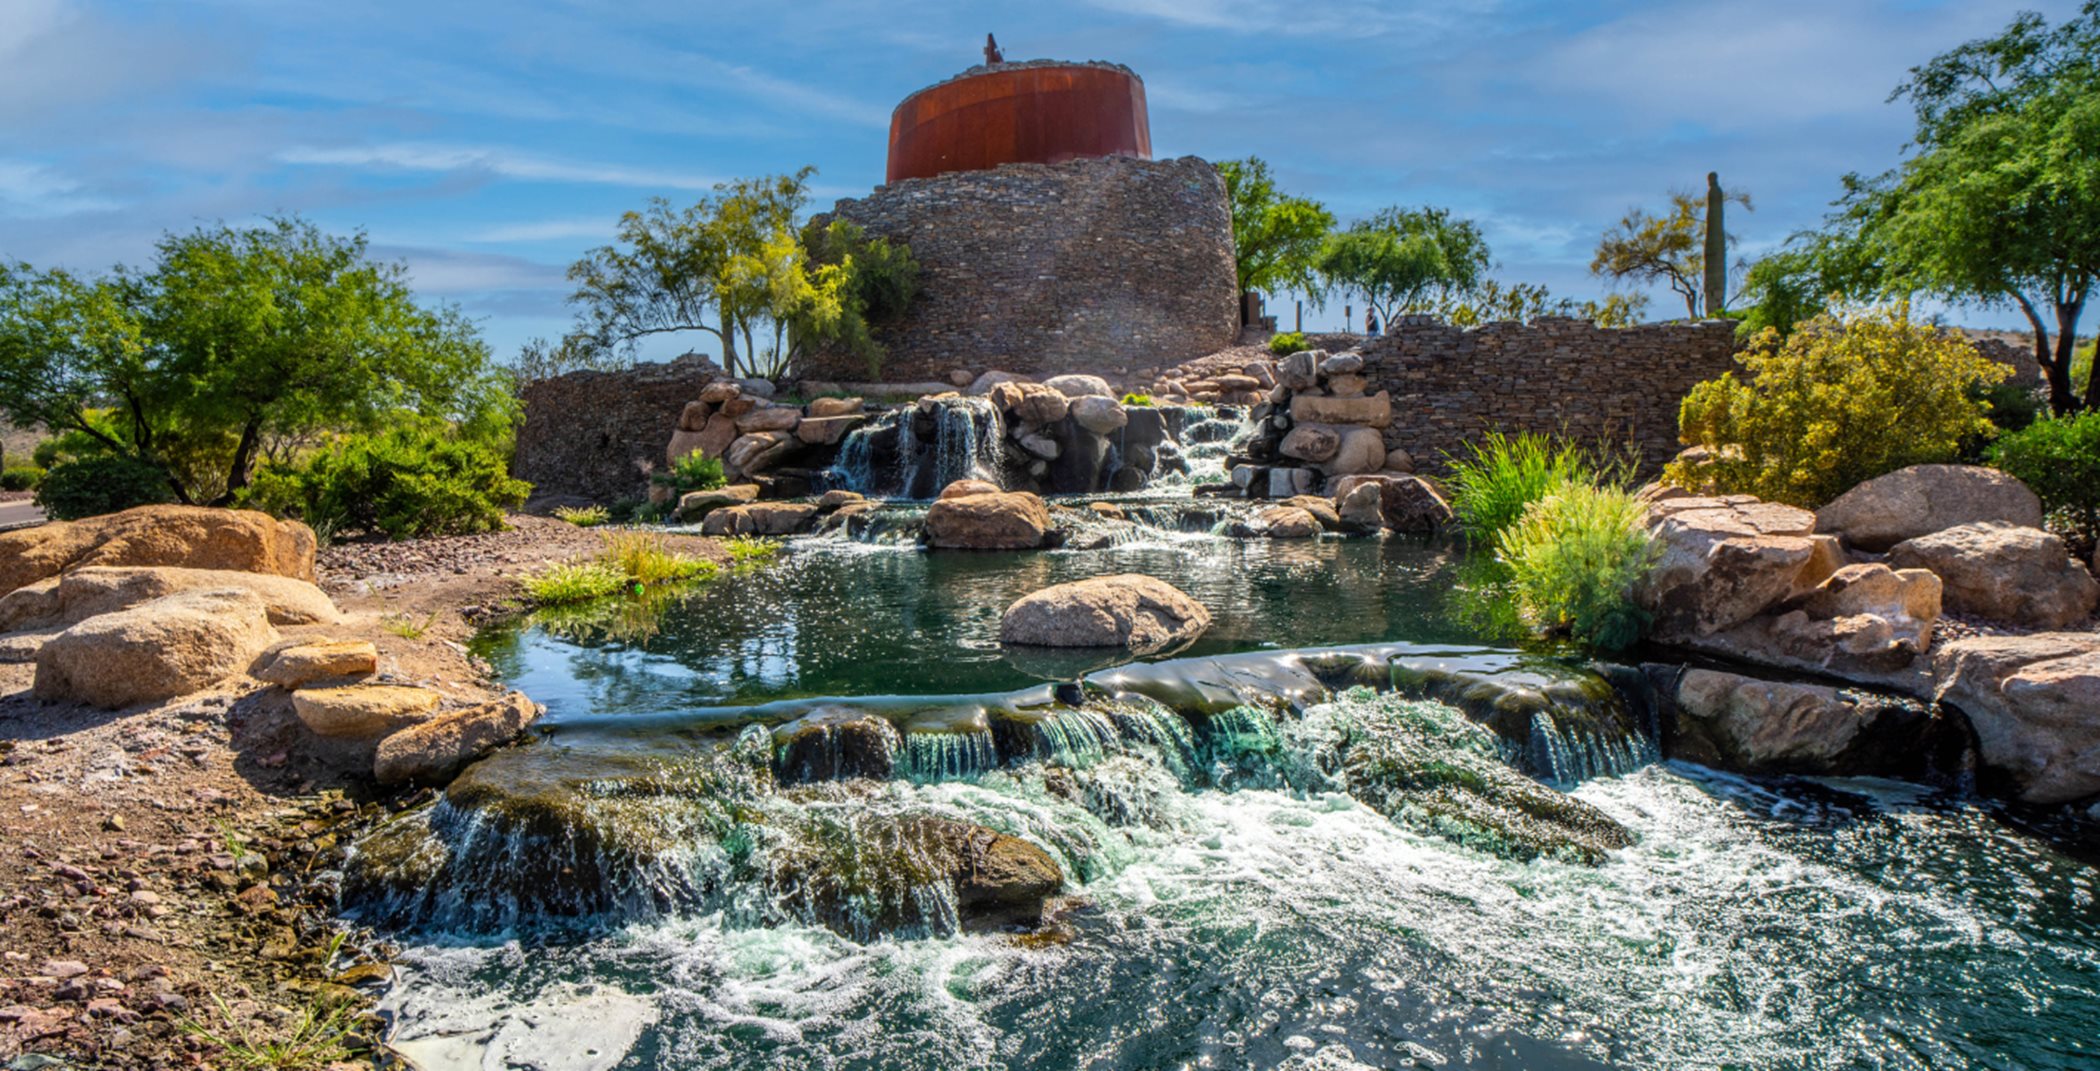 Estrella Star Tower and small waterfall